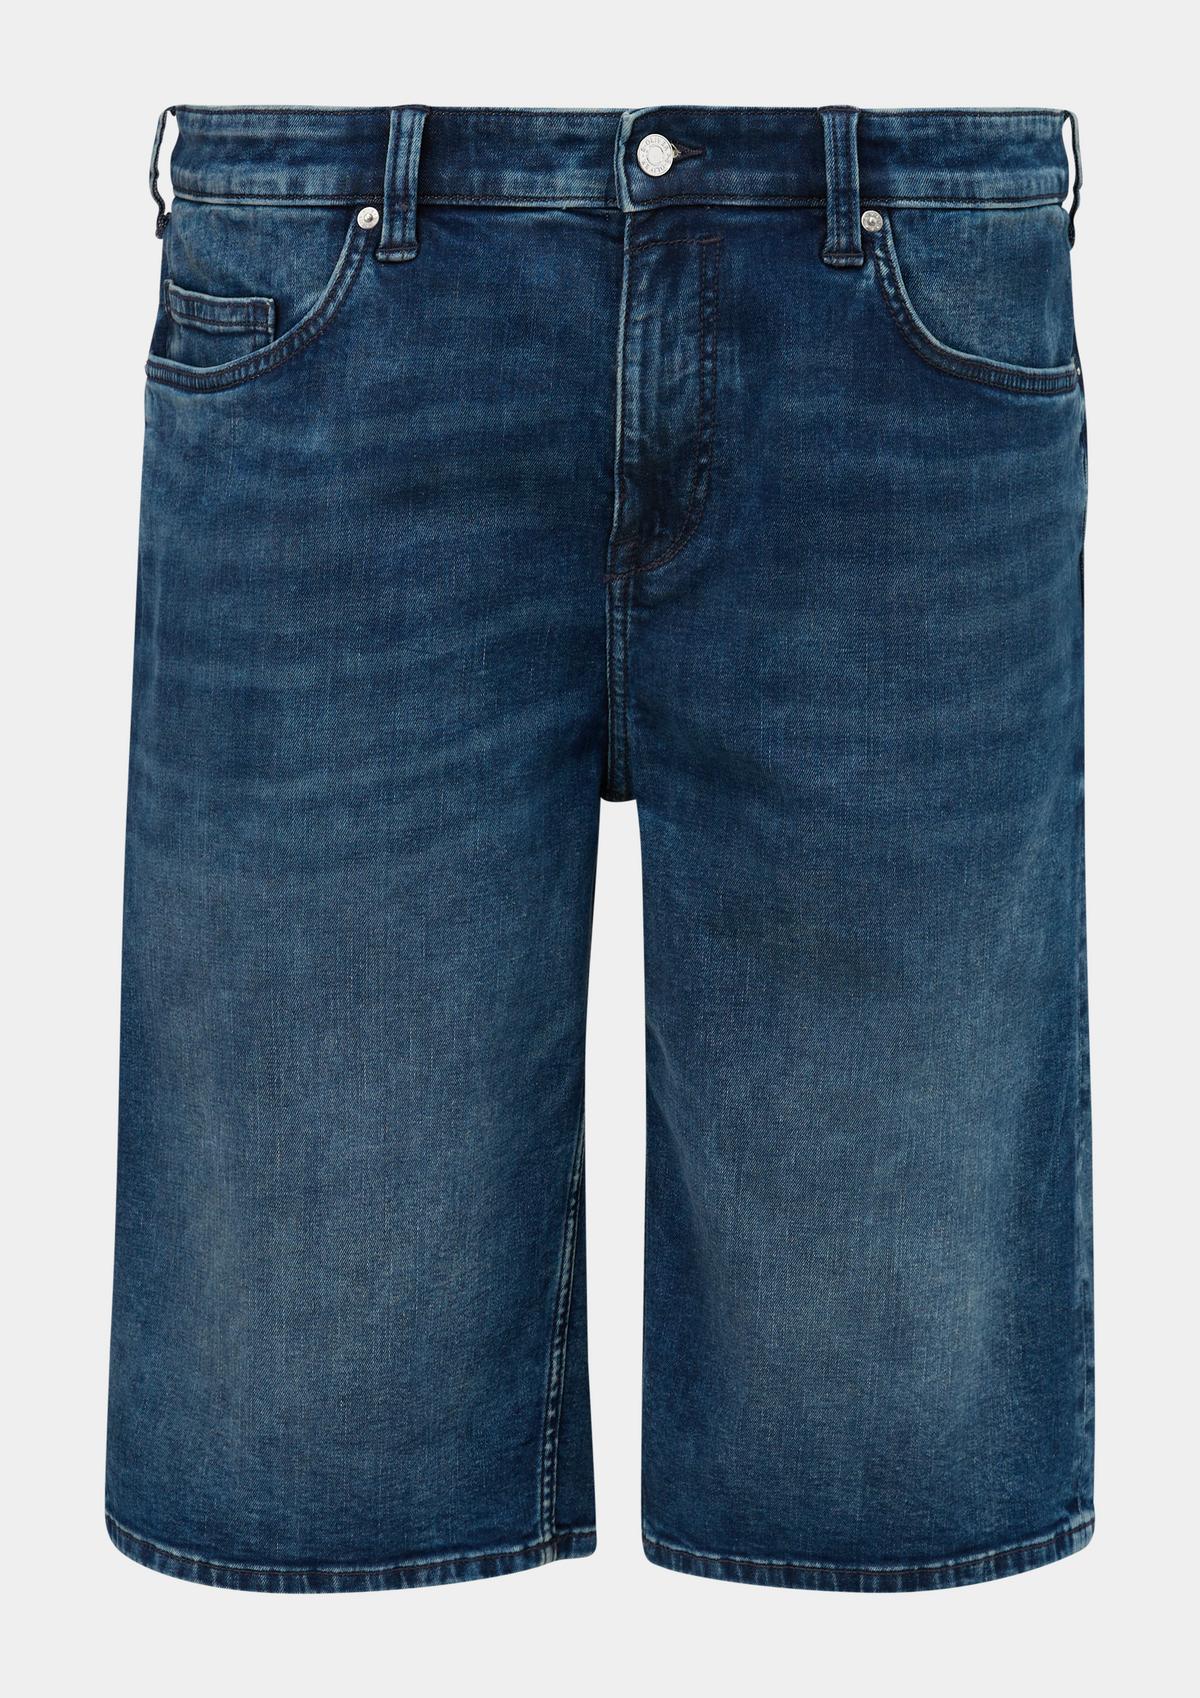 s.Oliver Relaxed: denim Bermudas with a garment wash